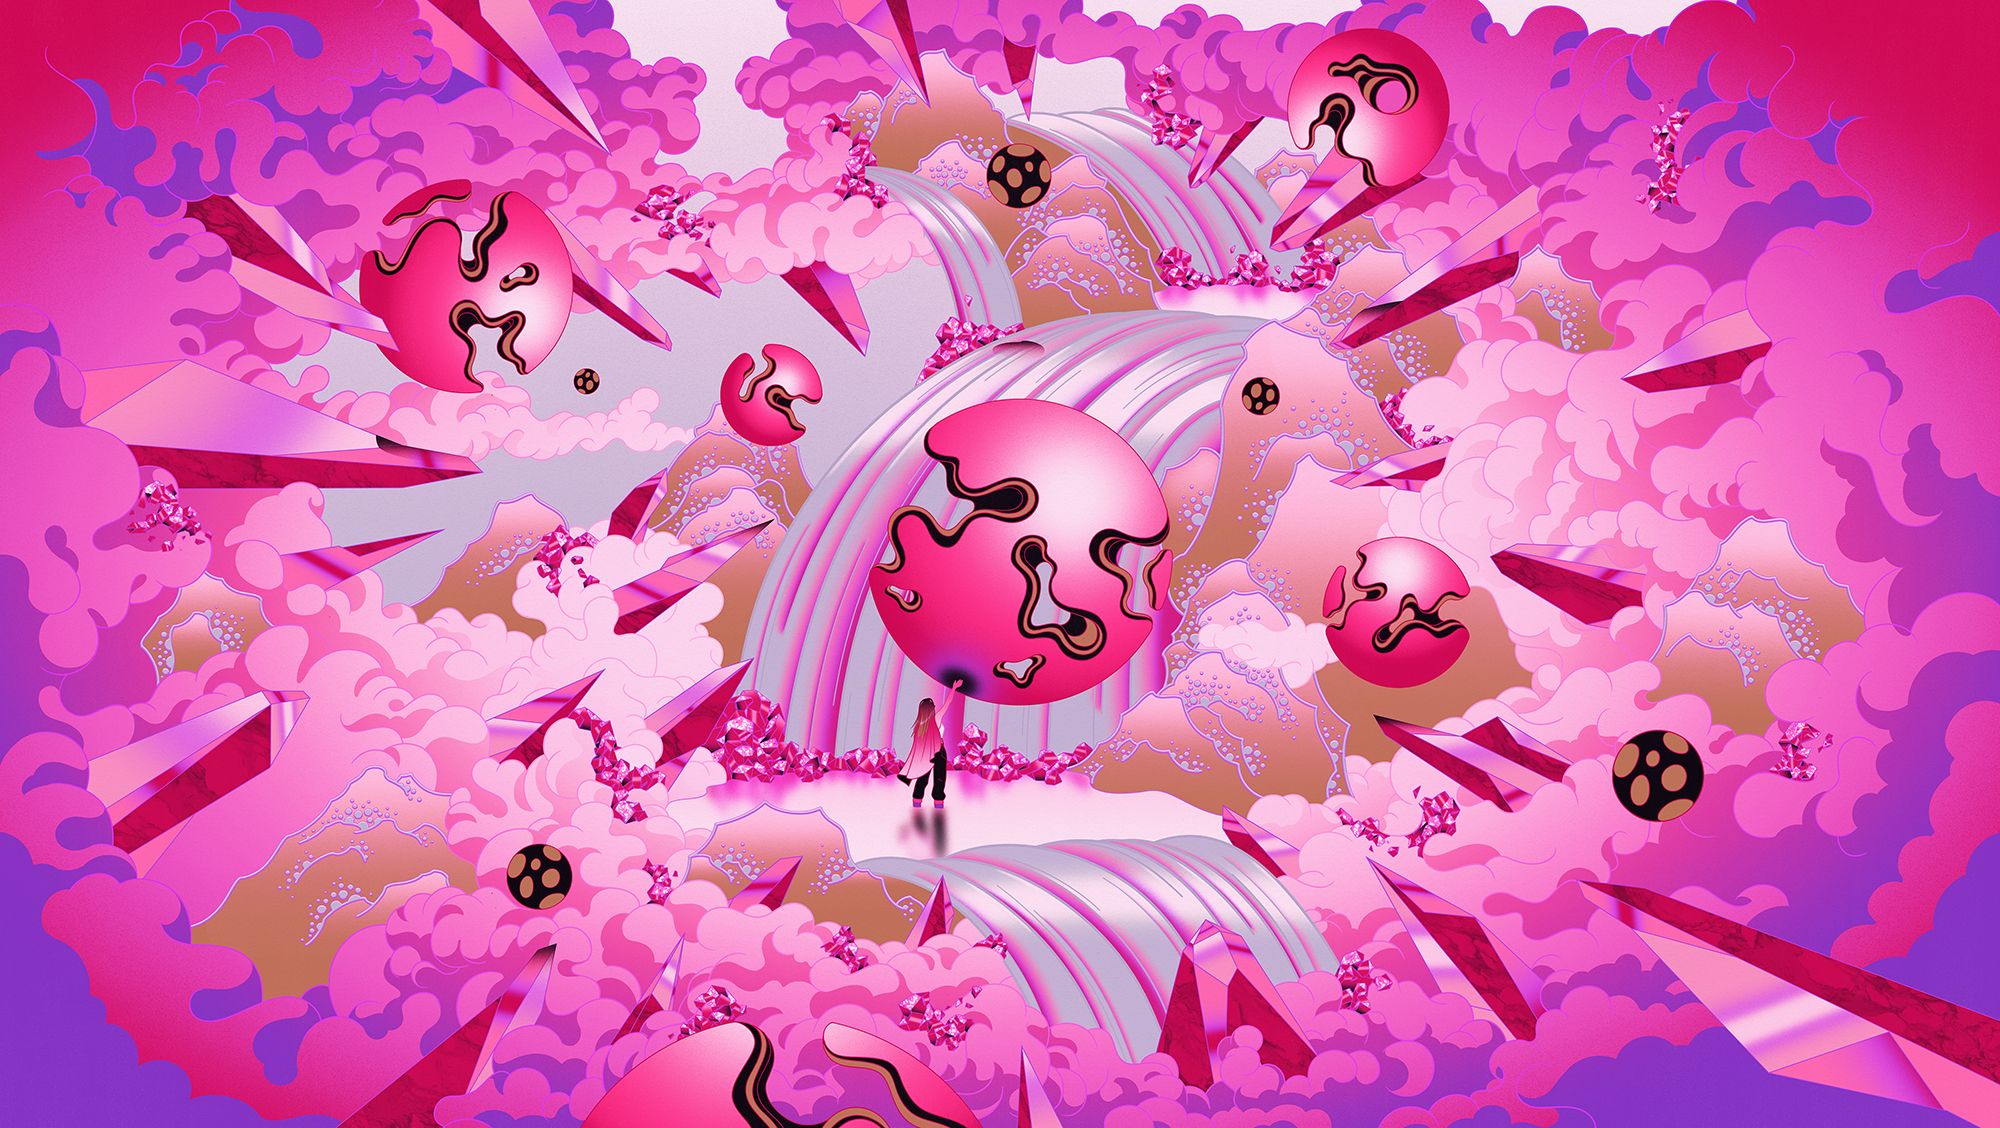 Illustration of Vivacious pink colorway world of clouds, ribbon like contours and pink spheres with spheres with parts hollowed out.